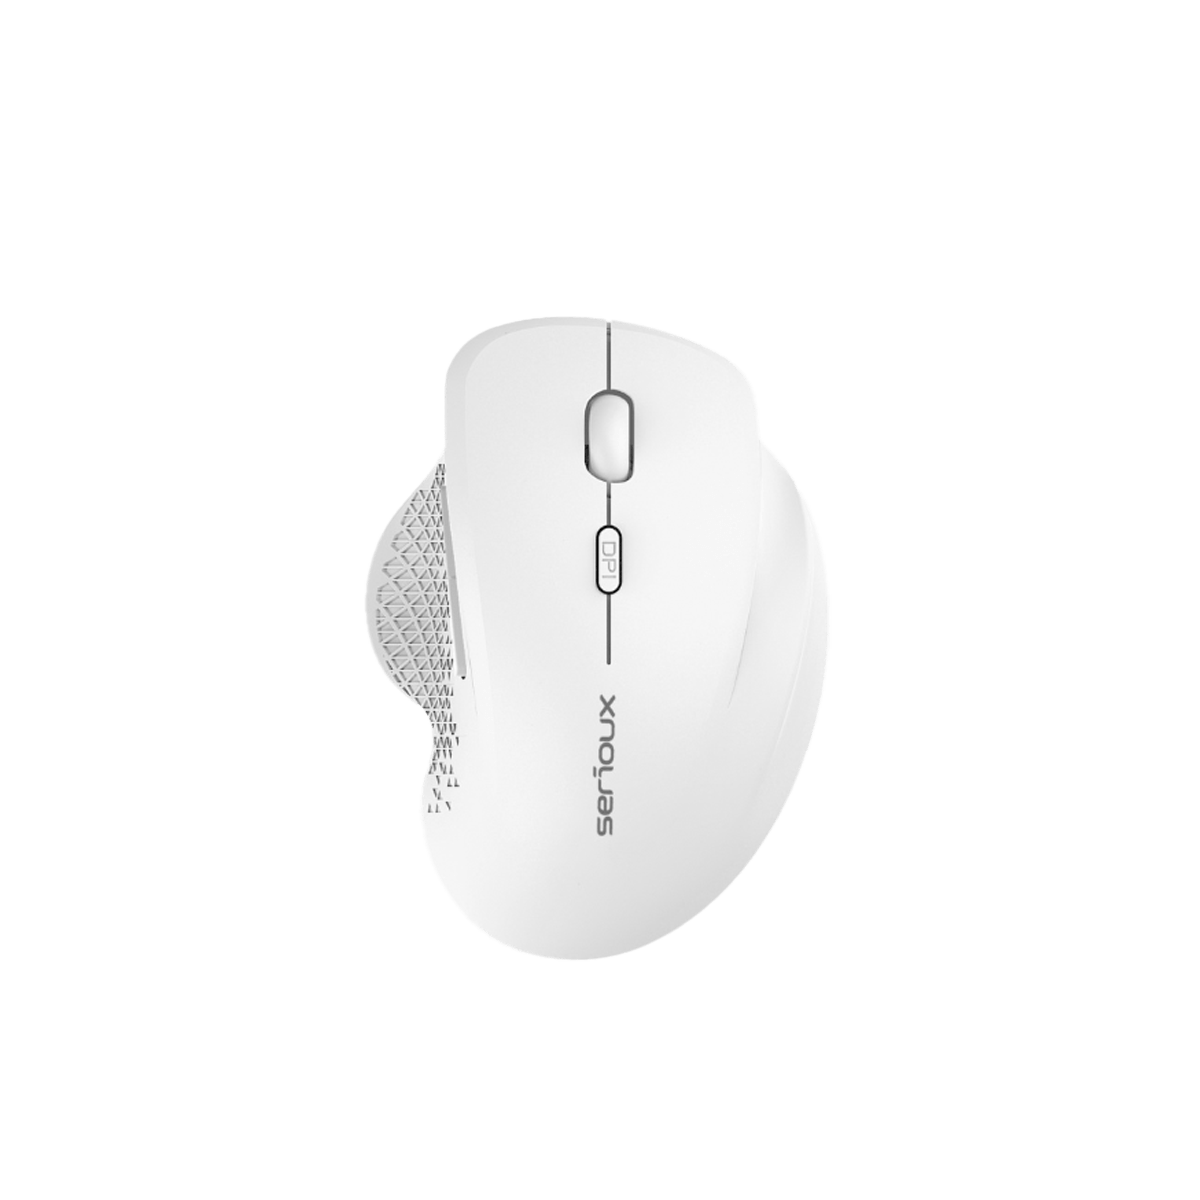 Mouse Serioux GLIDE 1